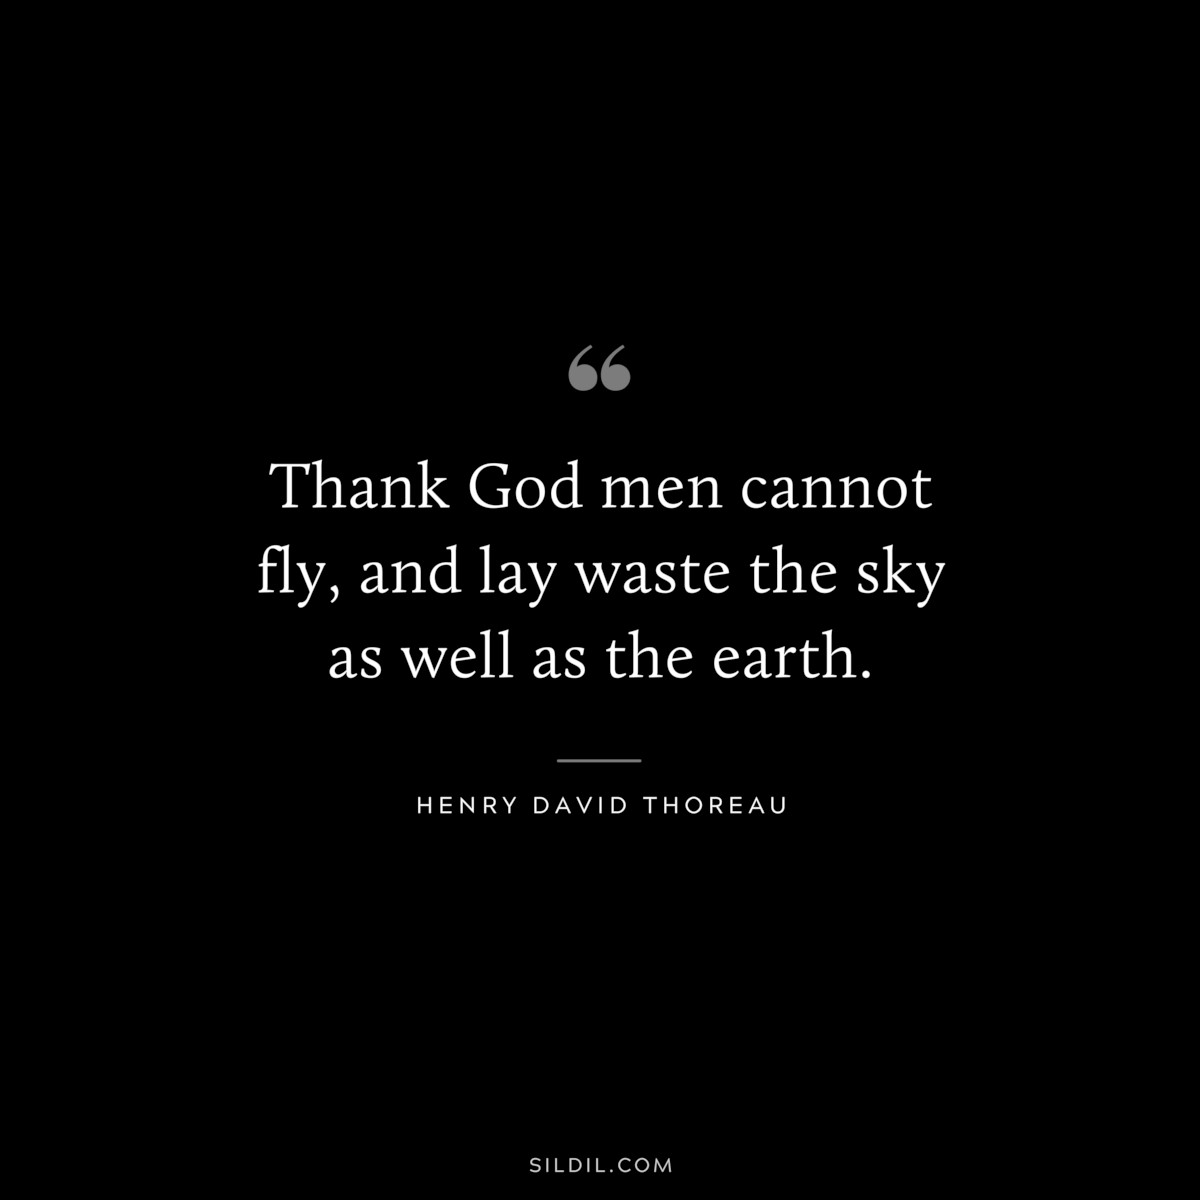 Thank God men cannot fly, and lay waste the sky as well as the earth. — Henry David Thoreau